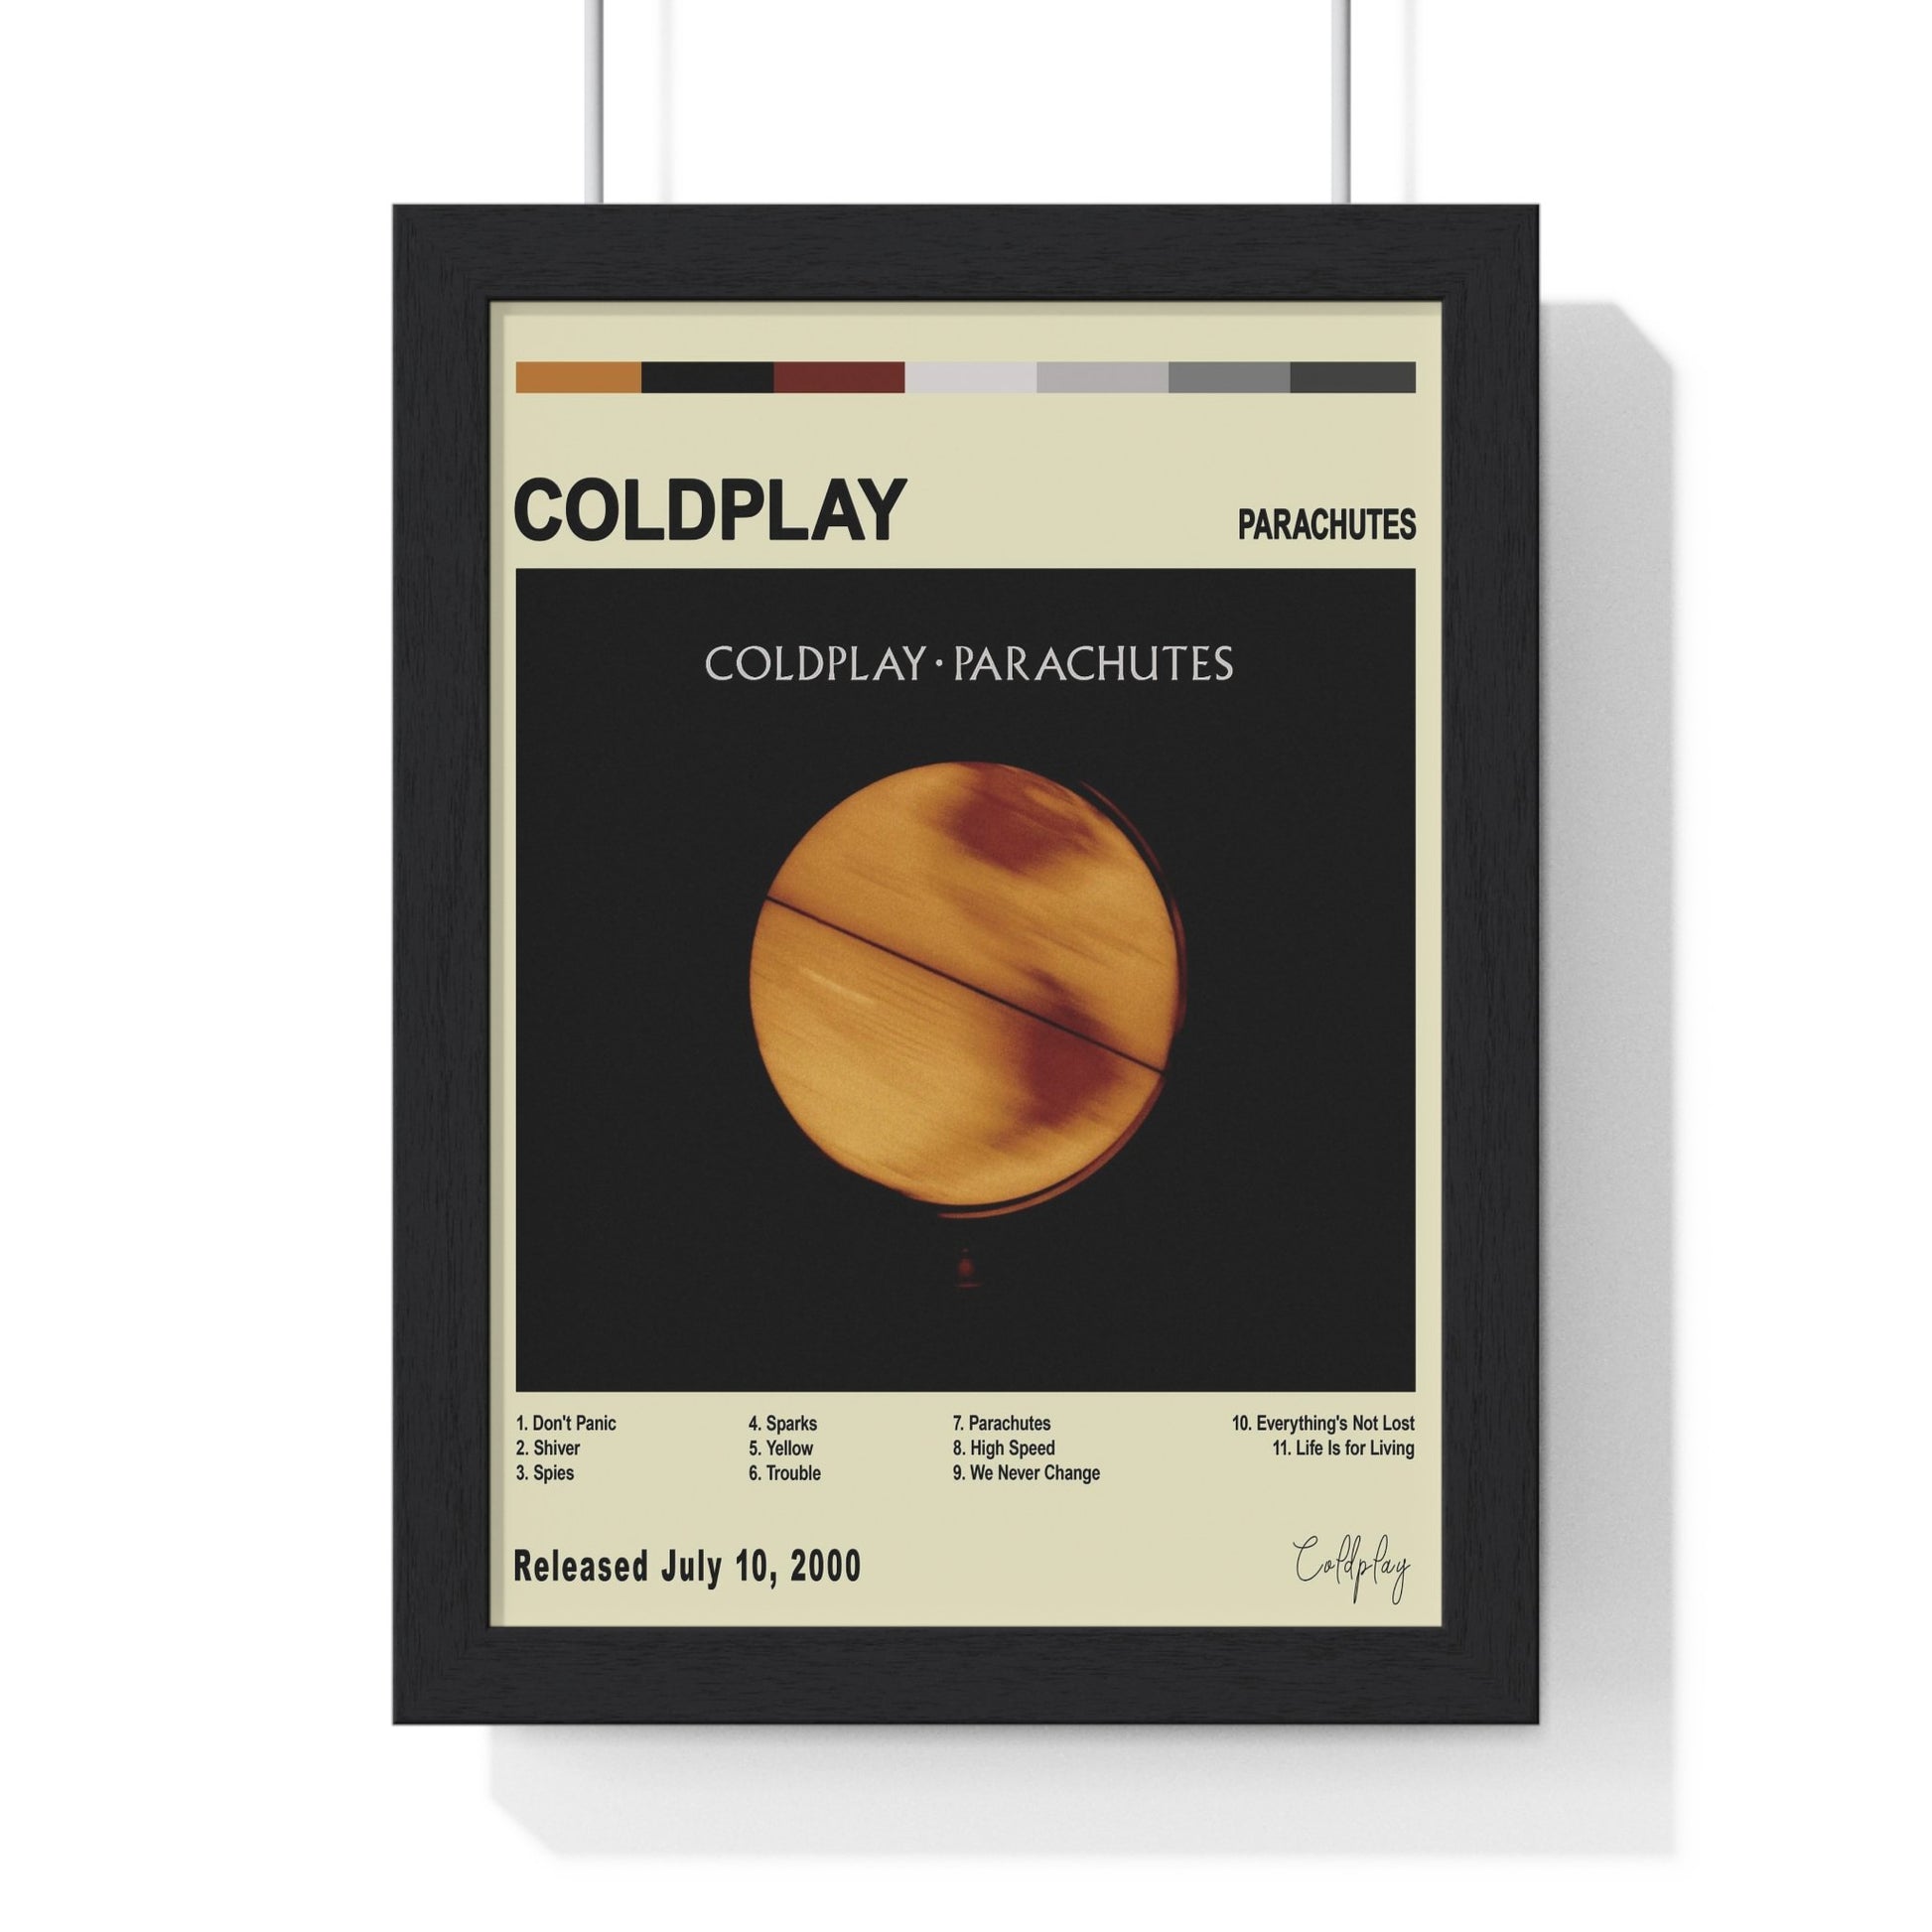 Coldplay Album Cover Wall Poster - Poster Kingz